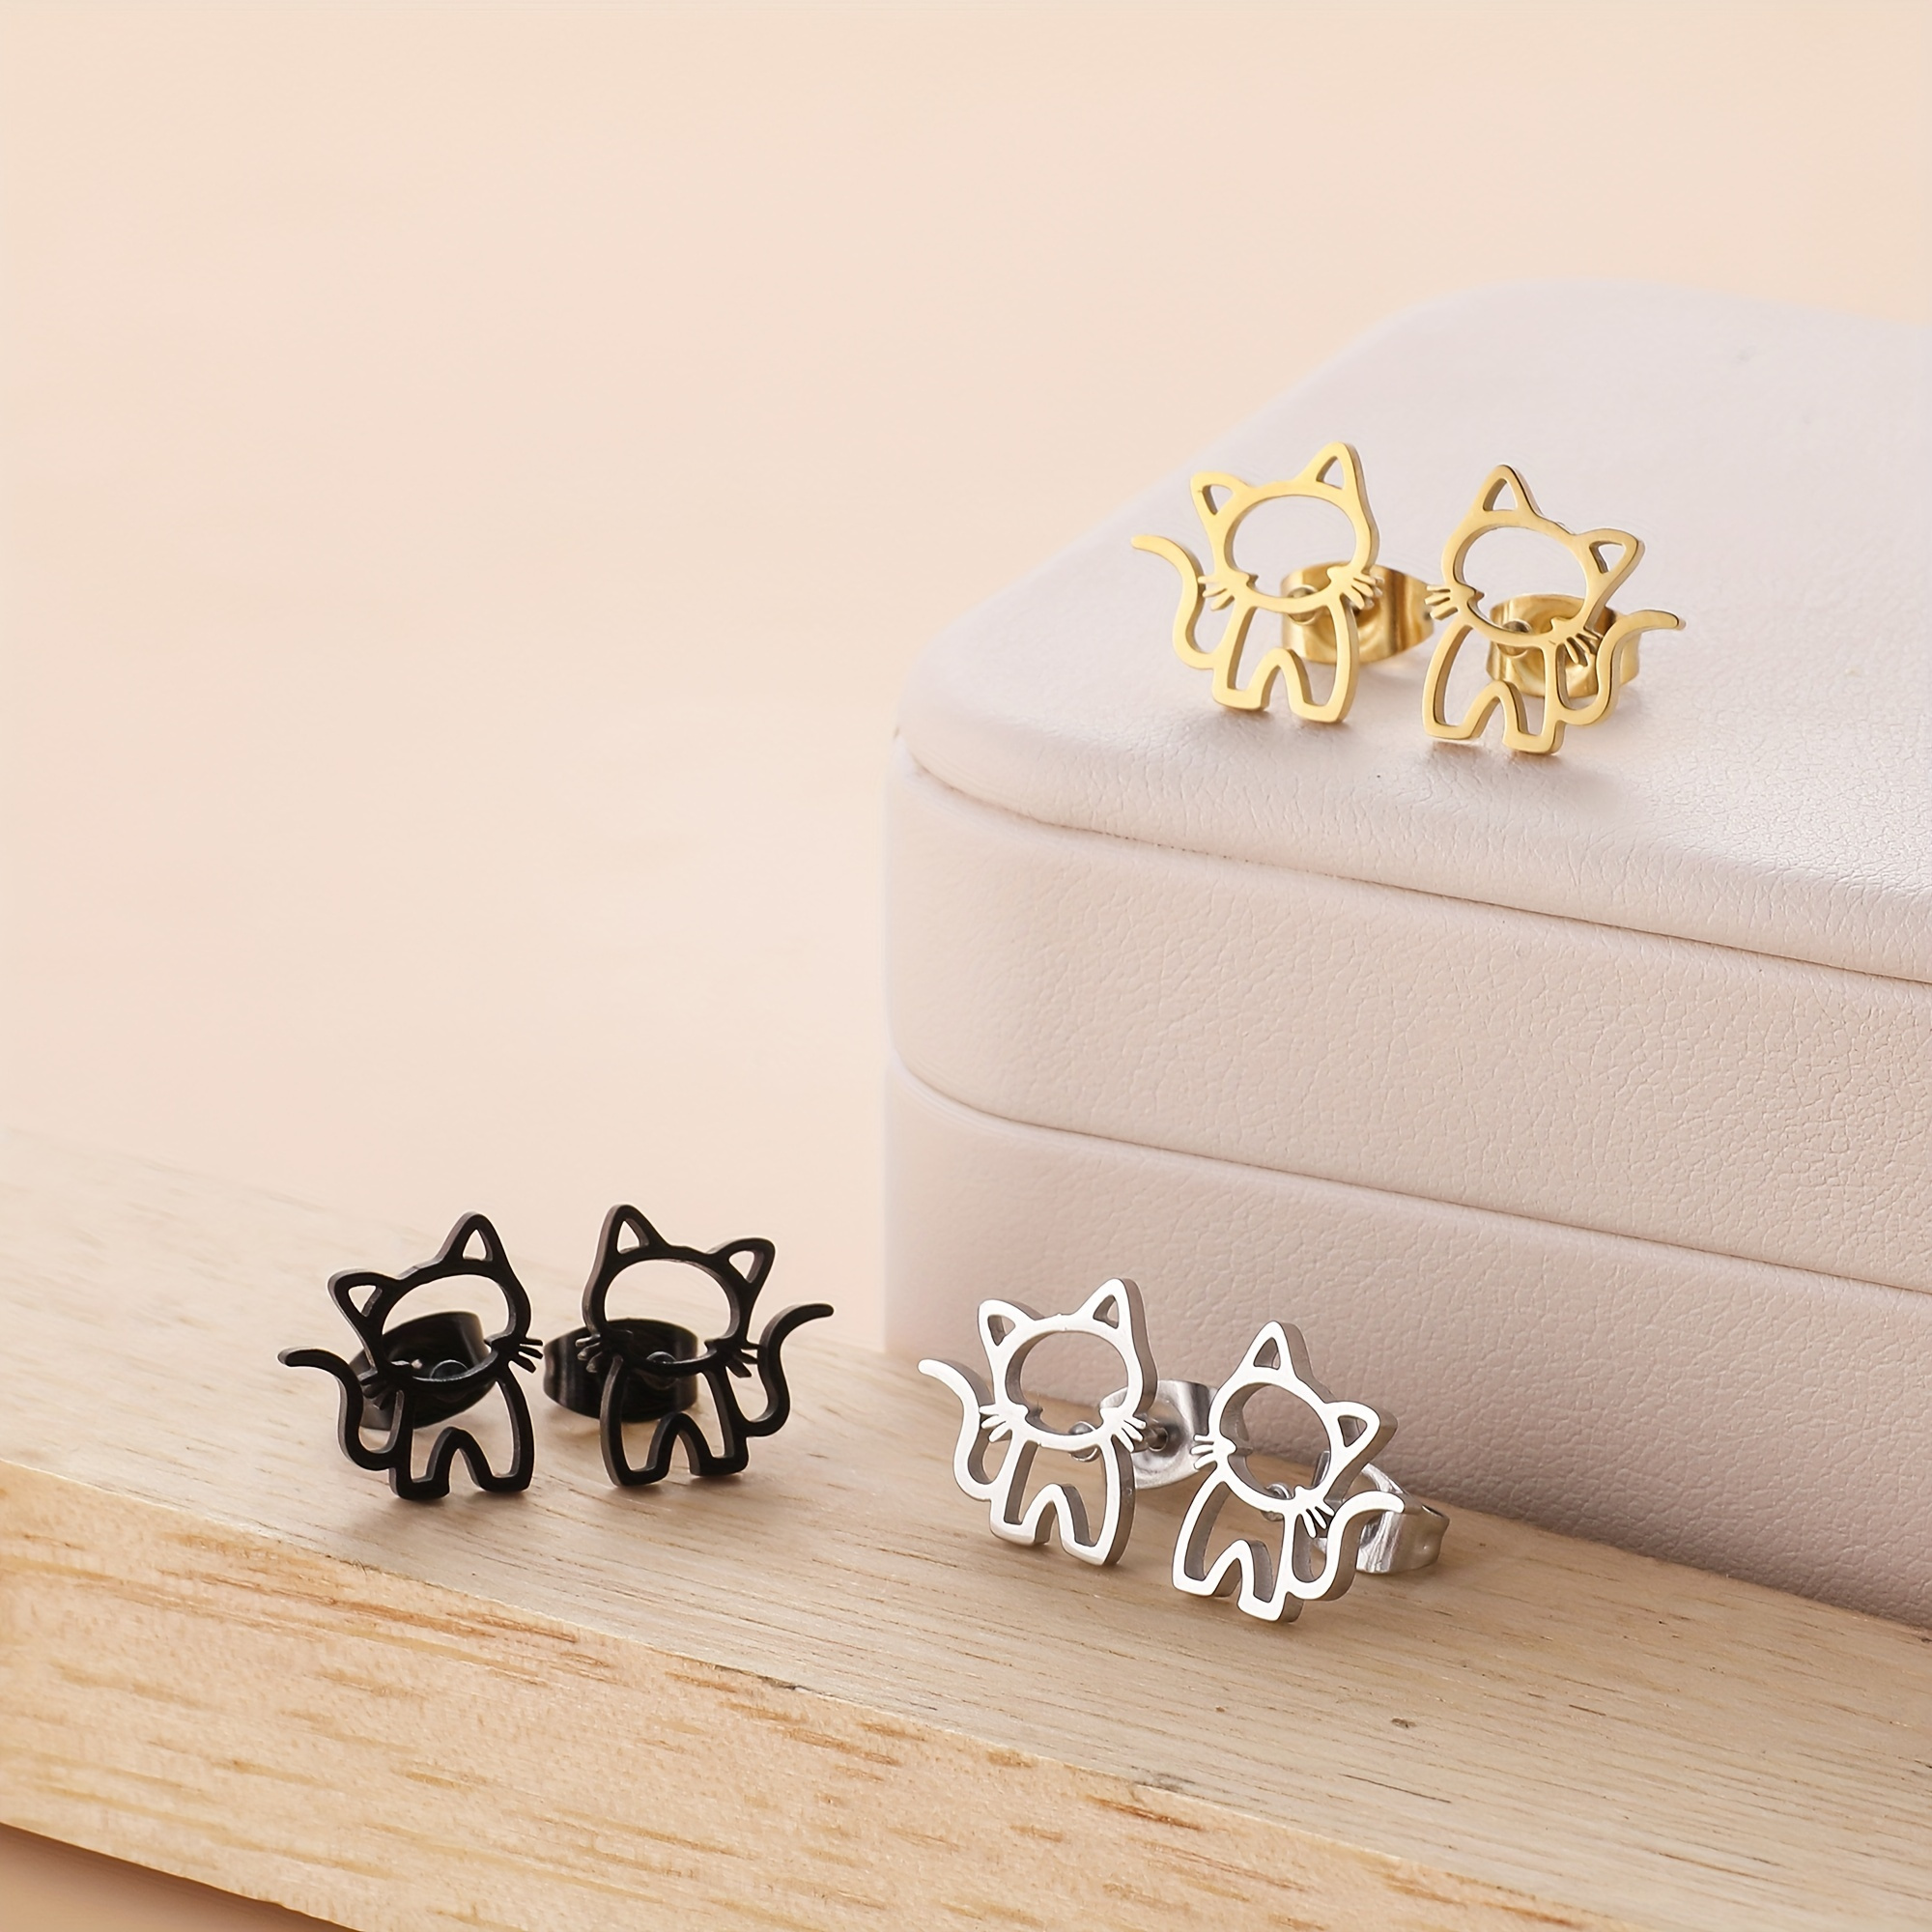 

3 Pairs Set Of Hollow Kitty Shaped Stud Earrings 18k Plated Elegant Leisure Style Lightweight Female Ear Accessories